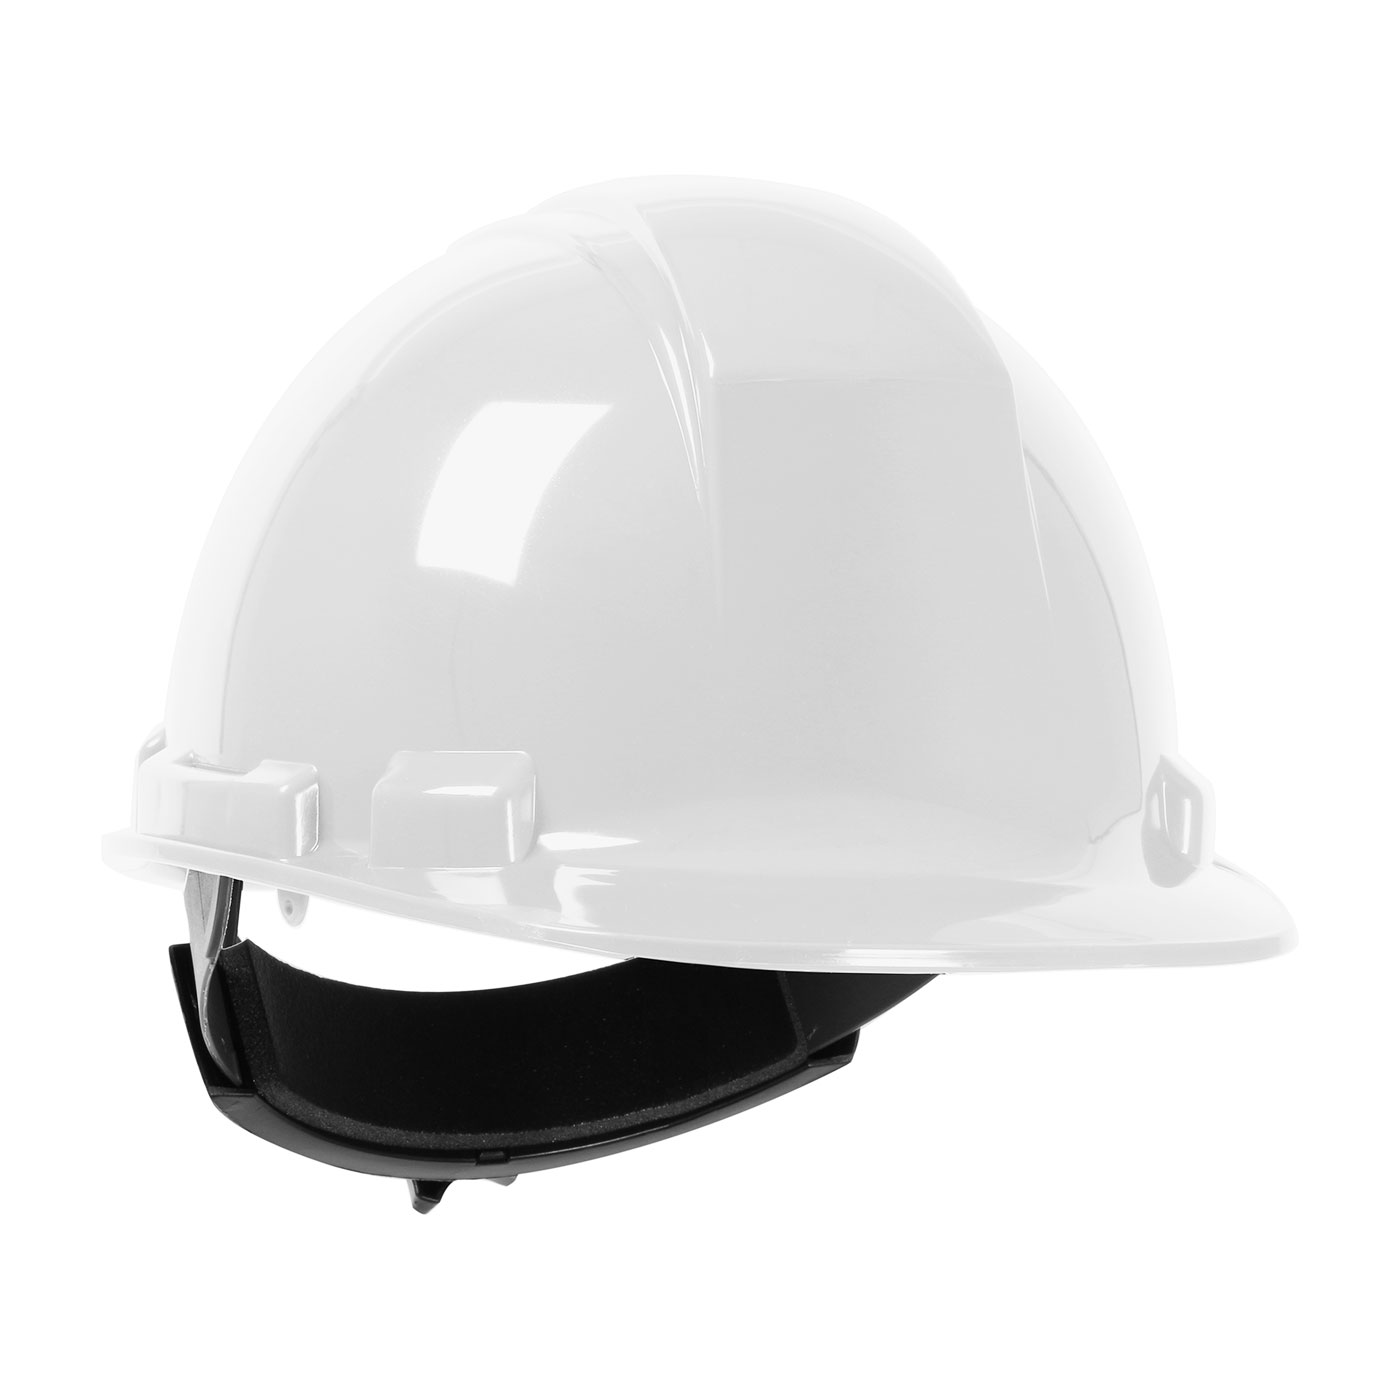 Beige ANSI Type I Dynamic Safety HP221/10 Whistler Hard Hat with 4-Point Plastic Suspension and Pin Lock Adjustment